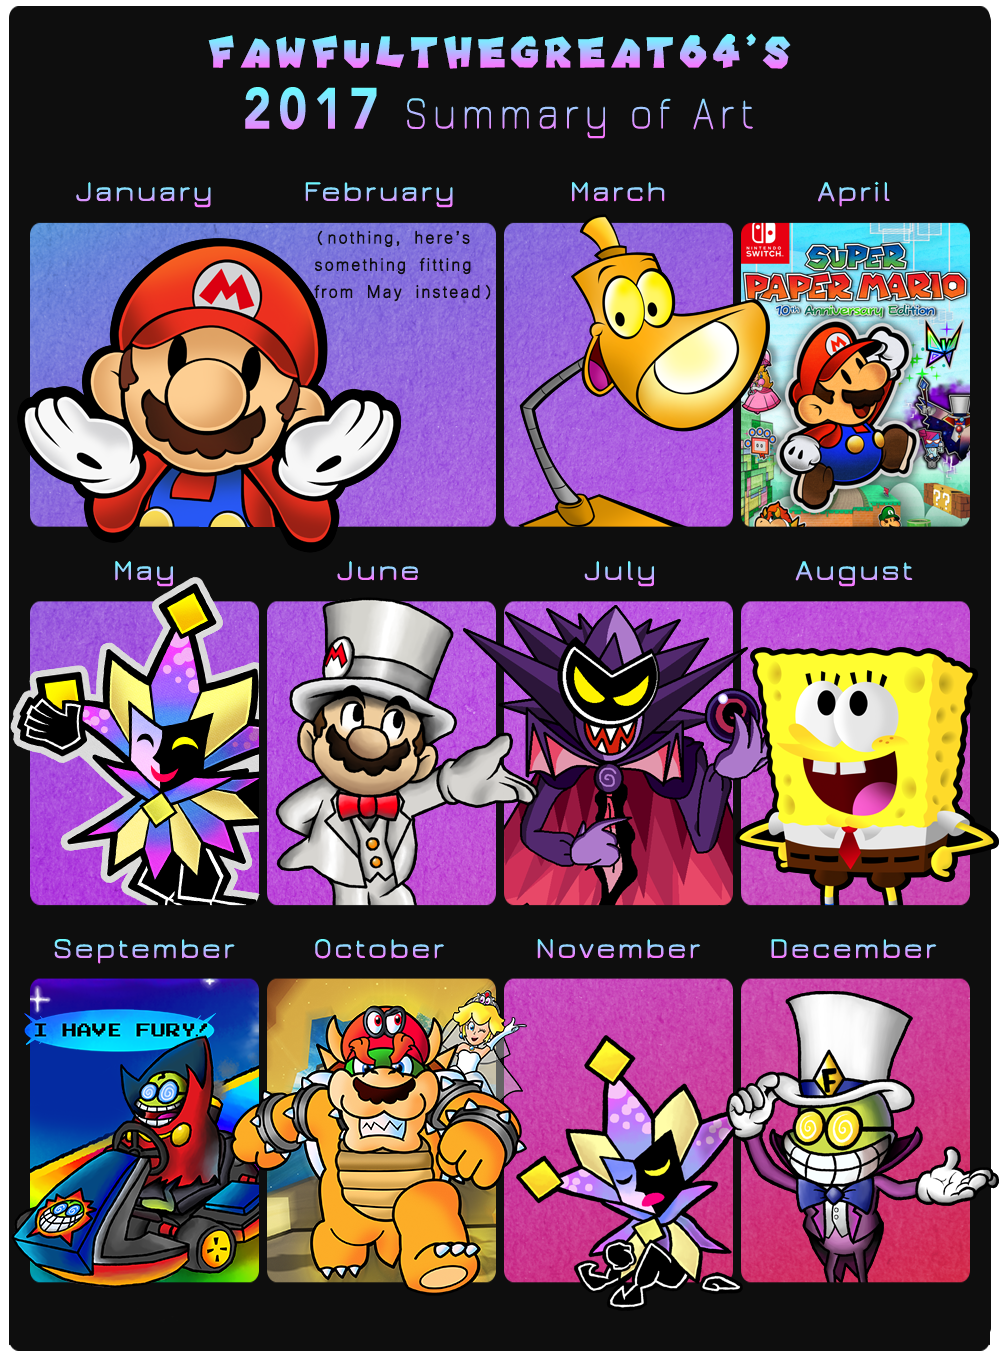 art_summary_2017_by_fawfulthegreat64-dbx9h38.png